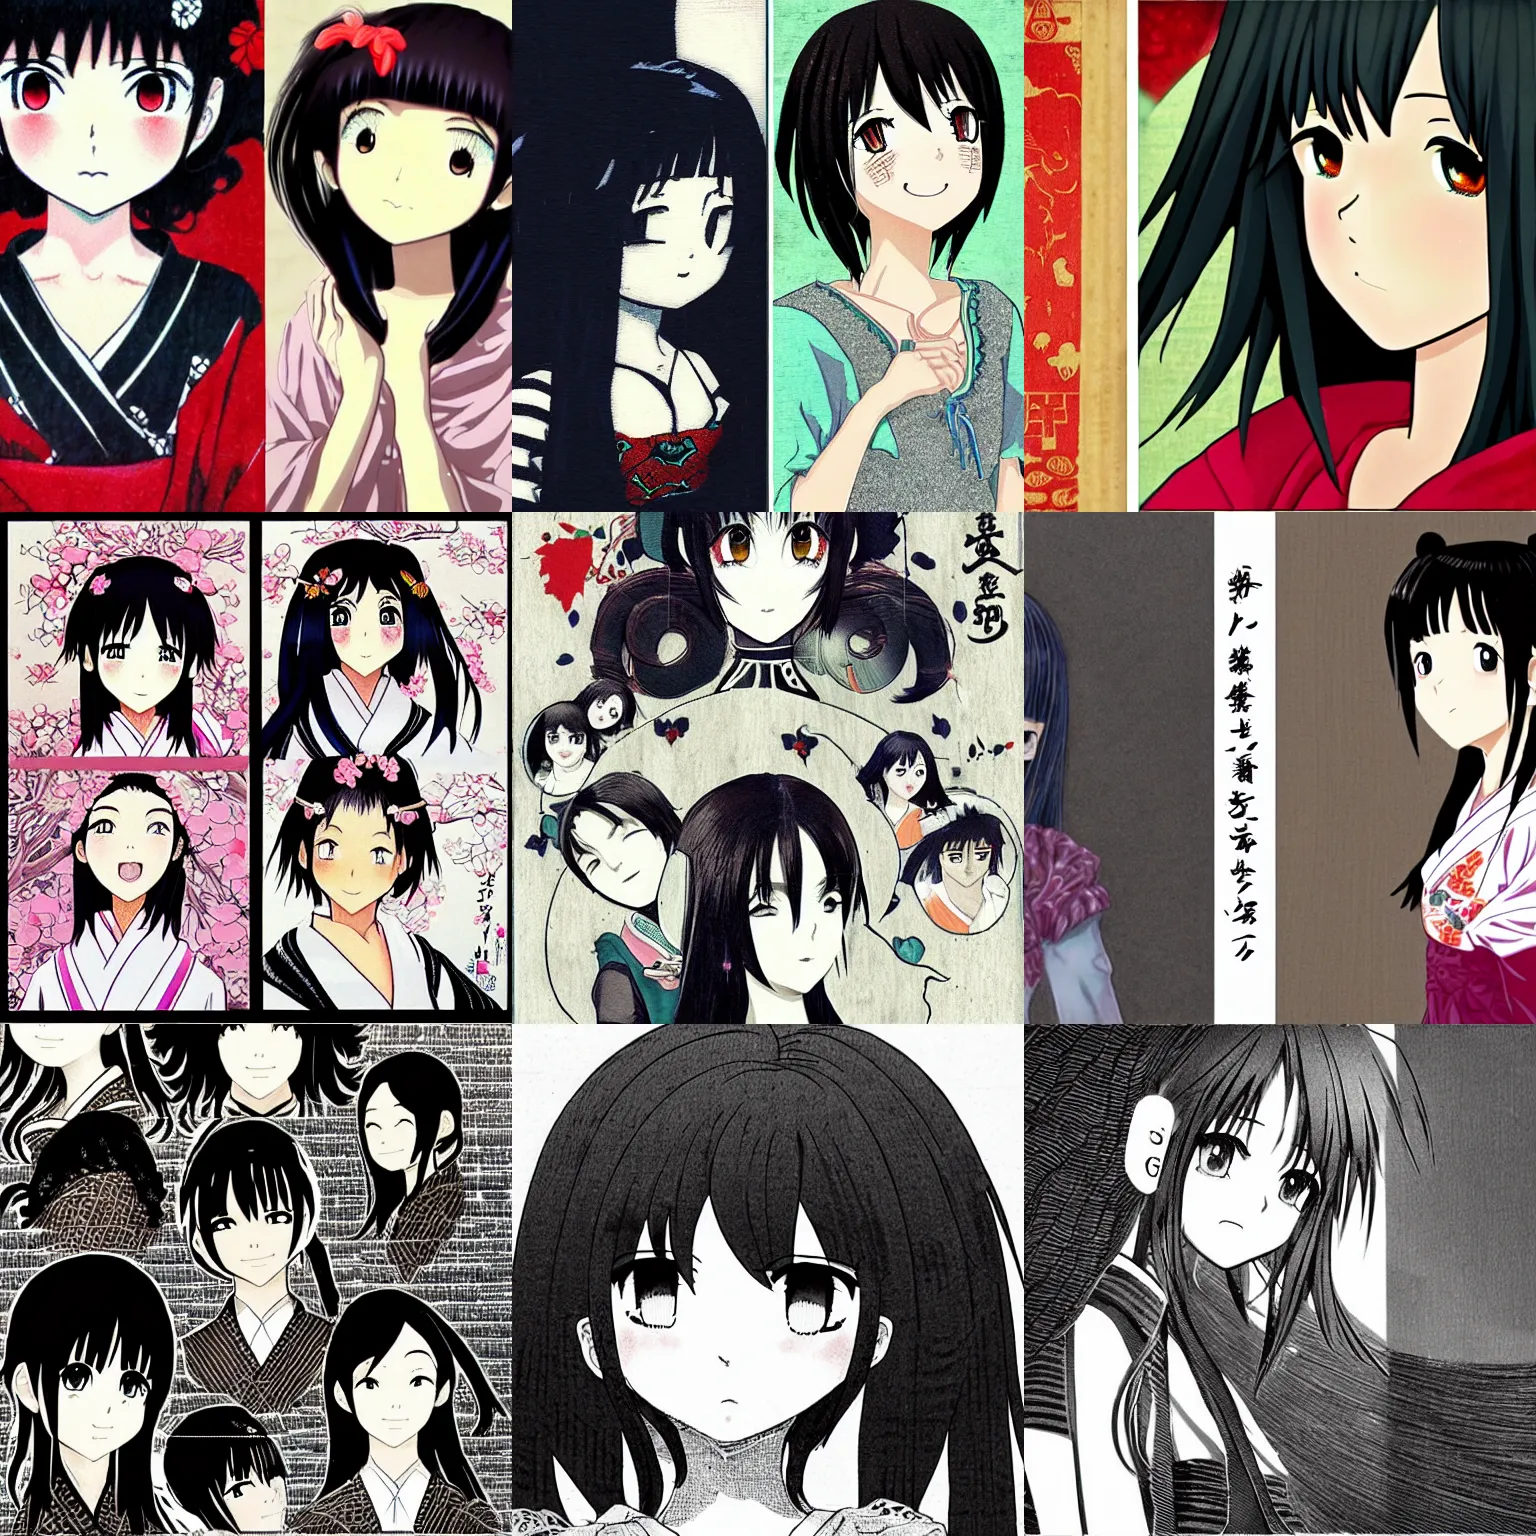 Prompt: photorealistic, a beautiful smiling anime's girl with black hair and hime cut in the style of Japanese and European woodcuts